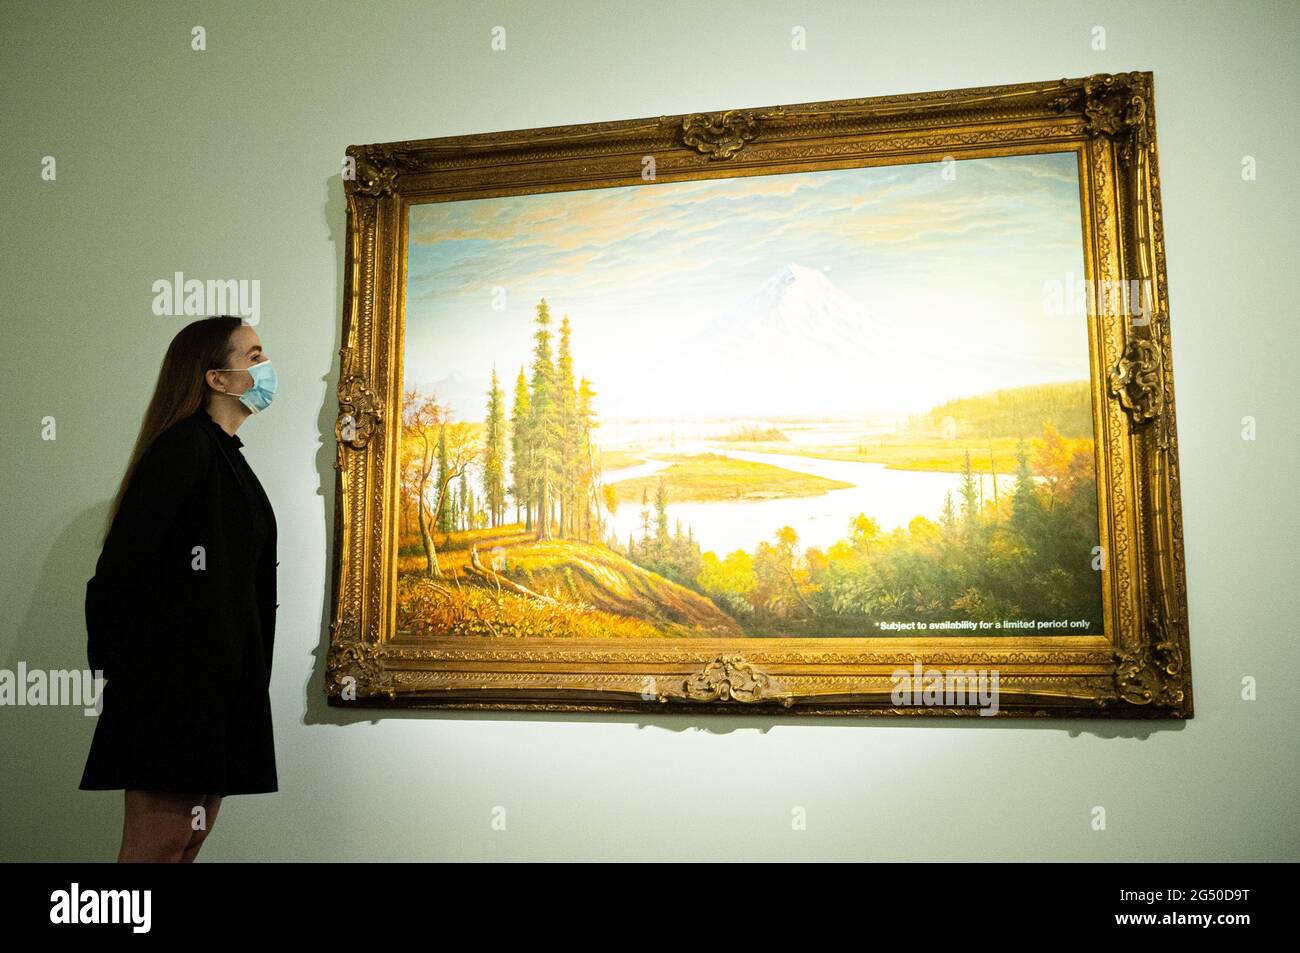 LONDON 24 June 2021. BANKSY Subject to Availability. Estimate: GBP 3,000,000 - GBP 5,000,000 IMAGES ARE ASKED TO BE UNDER EMBARGO UNTIL 10:30 AM. Credit amer ghazzal/Alamy Live News Stock Photo